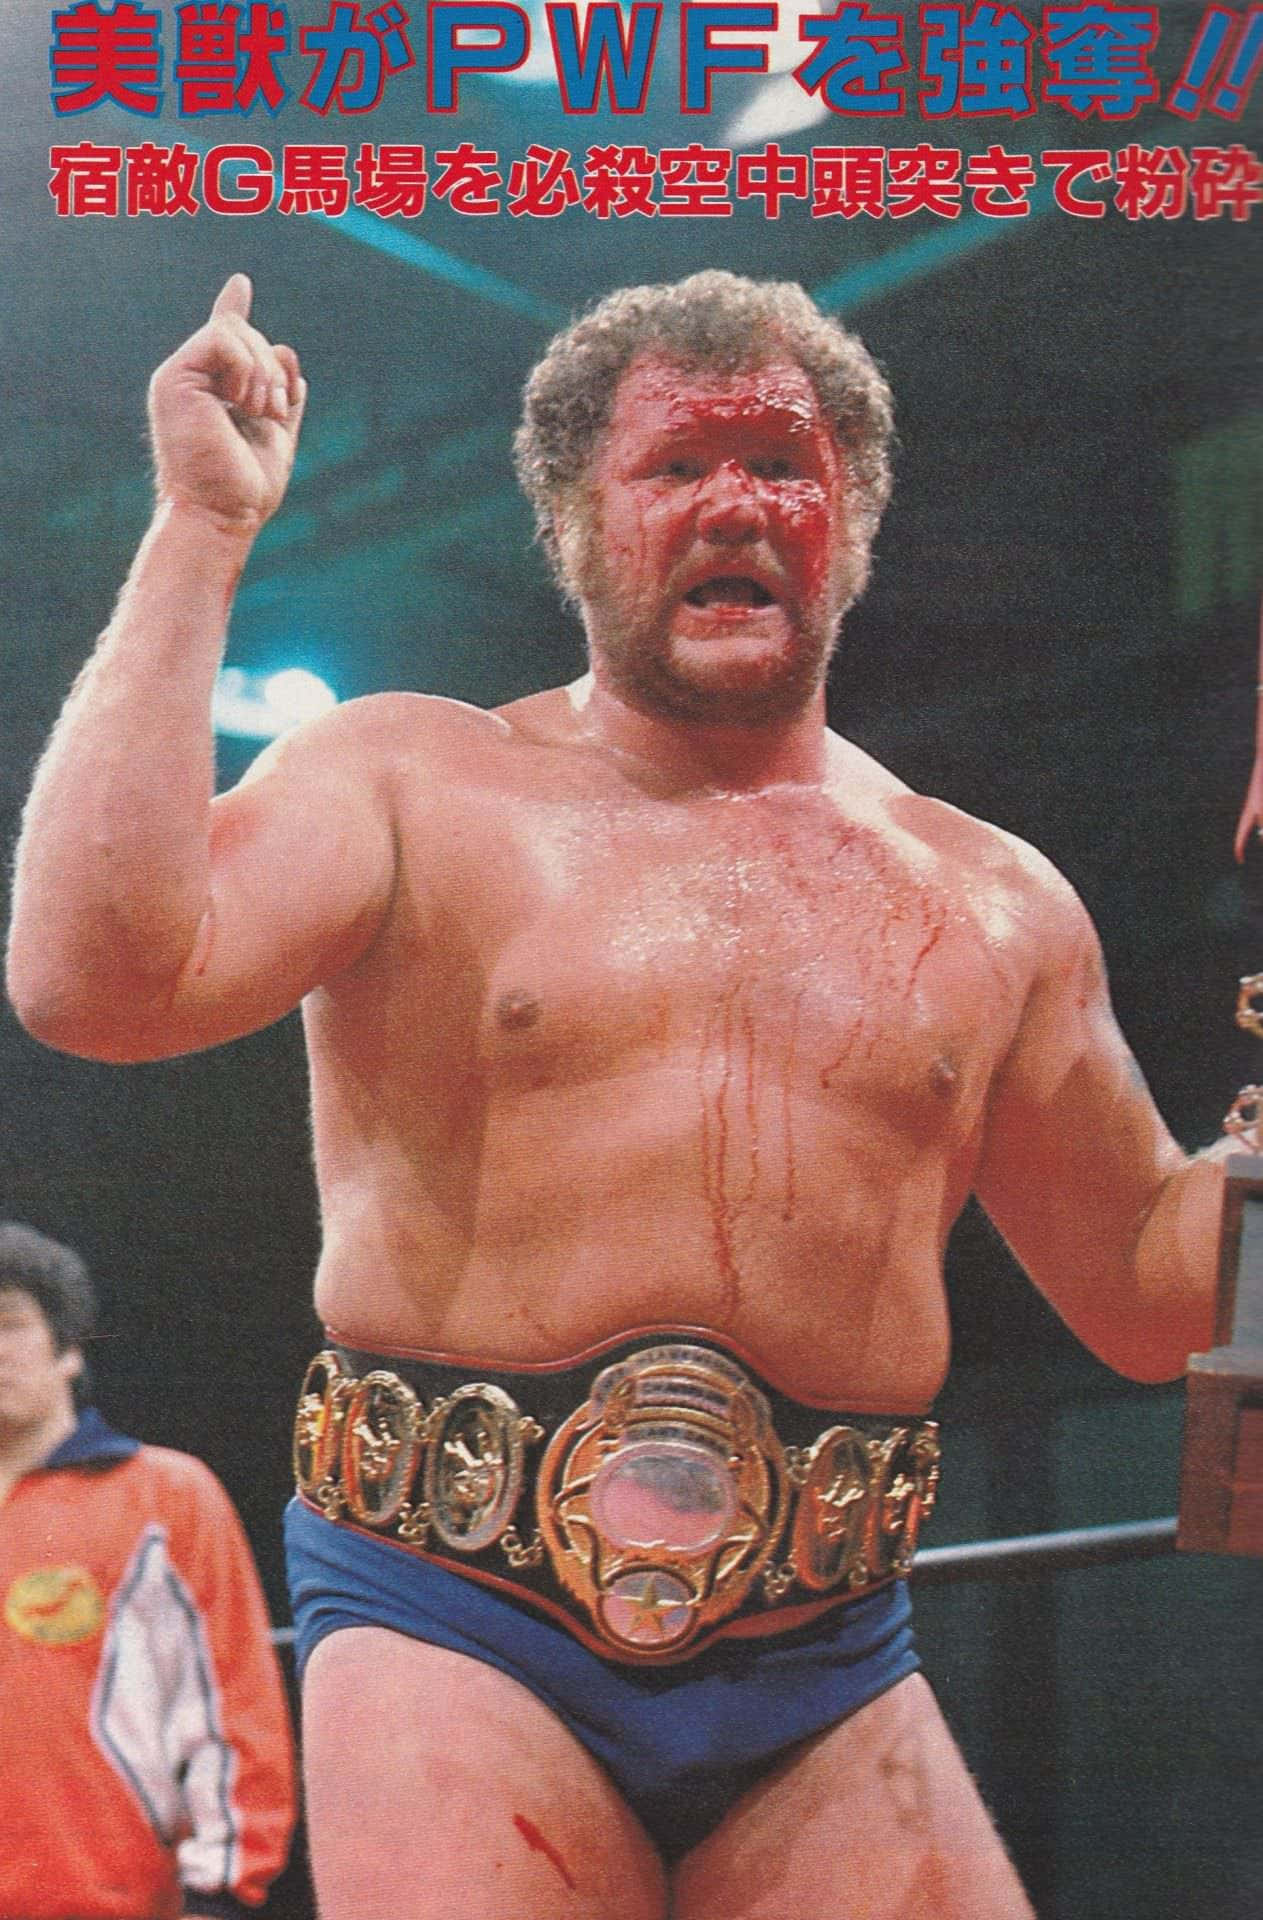 Harley Race Reigns At Pwf World Championship Wallpaper